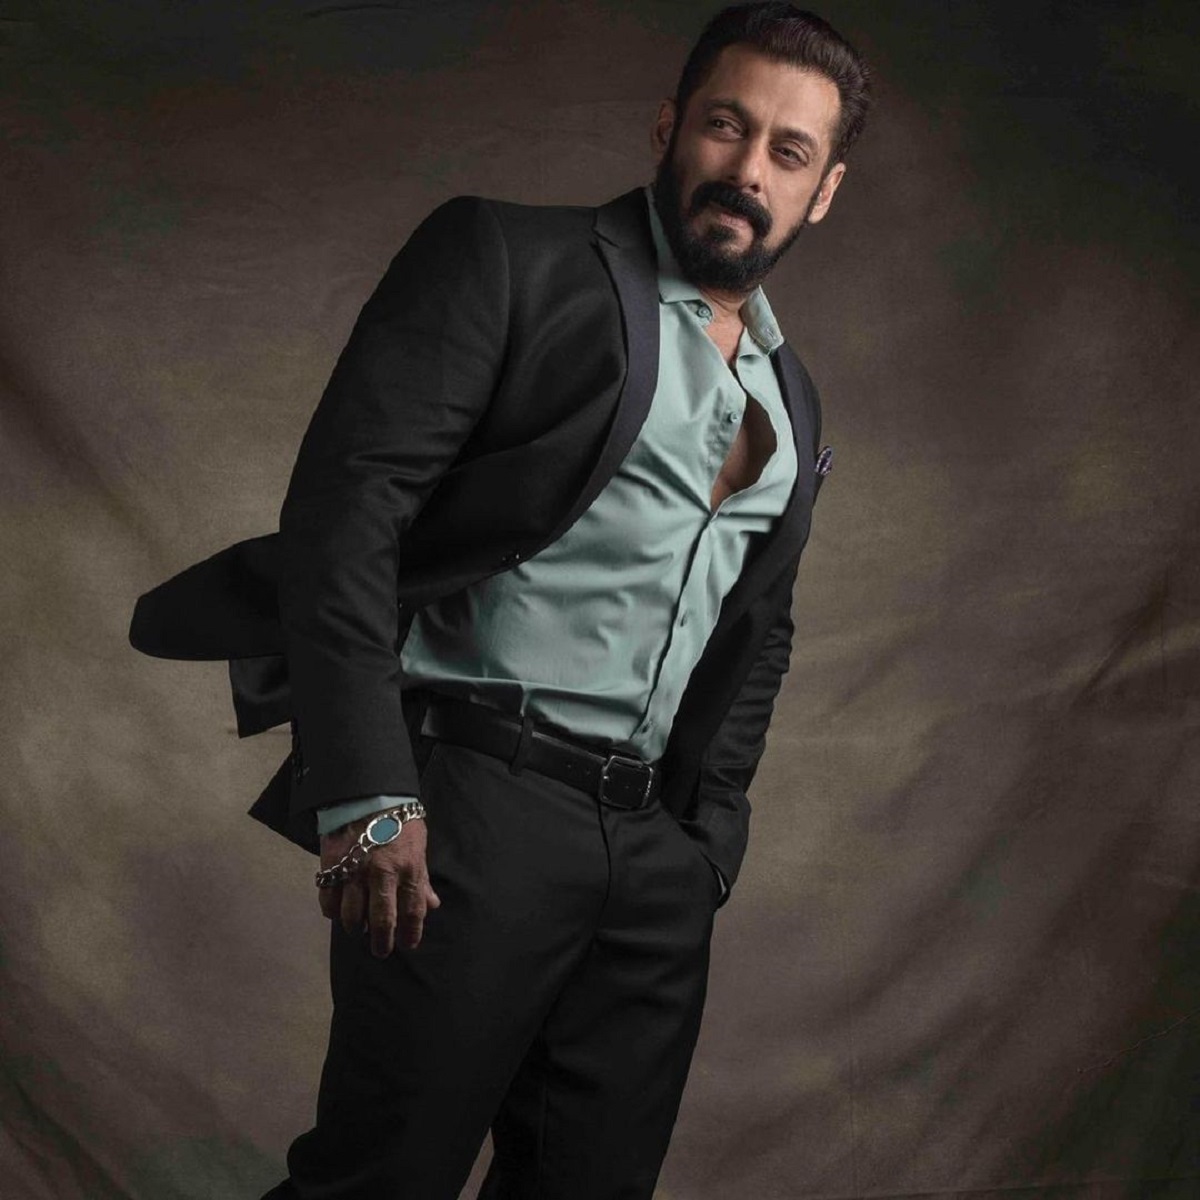 EXCLUSIVE: Salman Khan takes a break from Tiger 3 shoot to promote Antim - All set to travel across India 